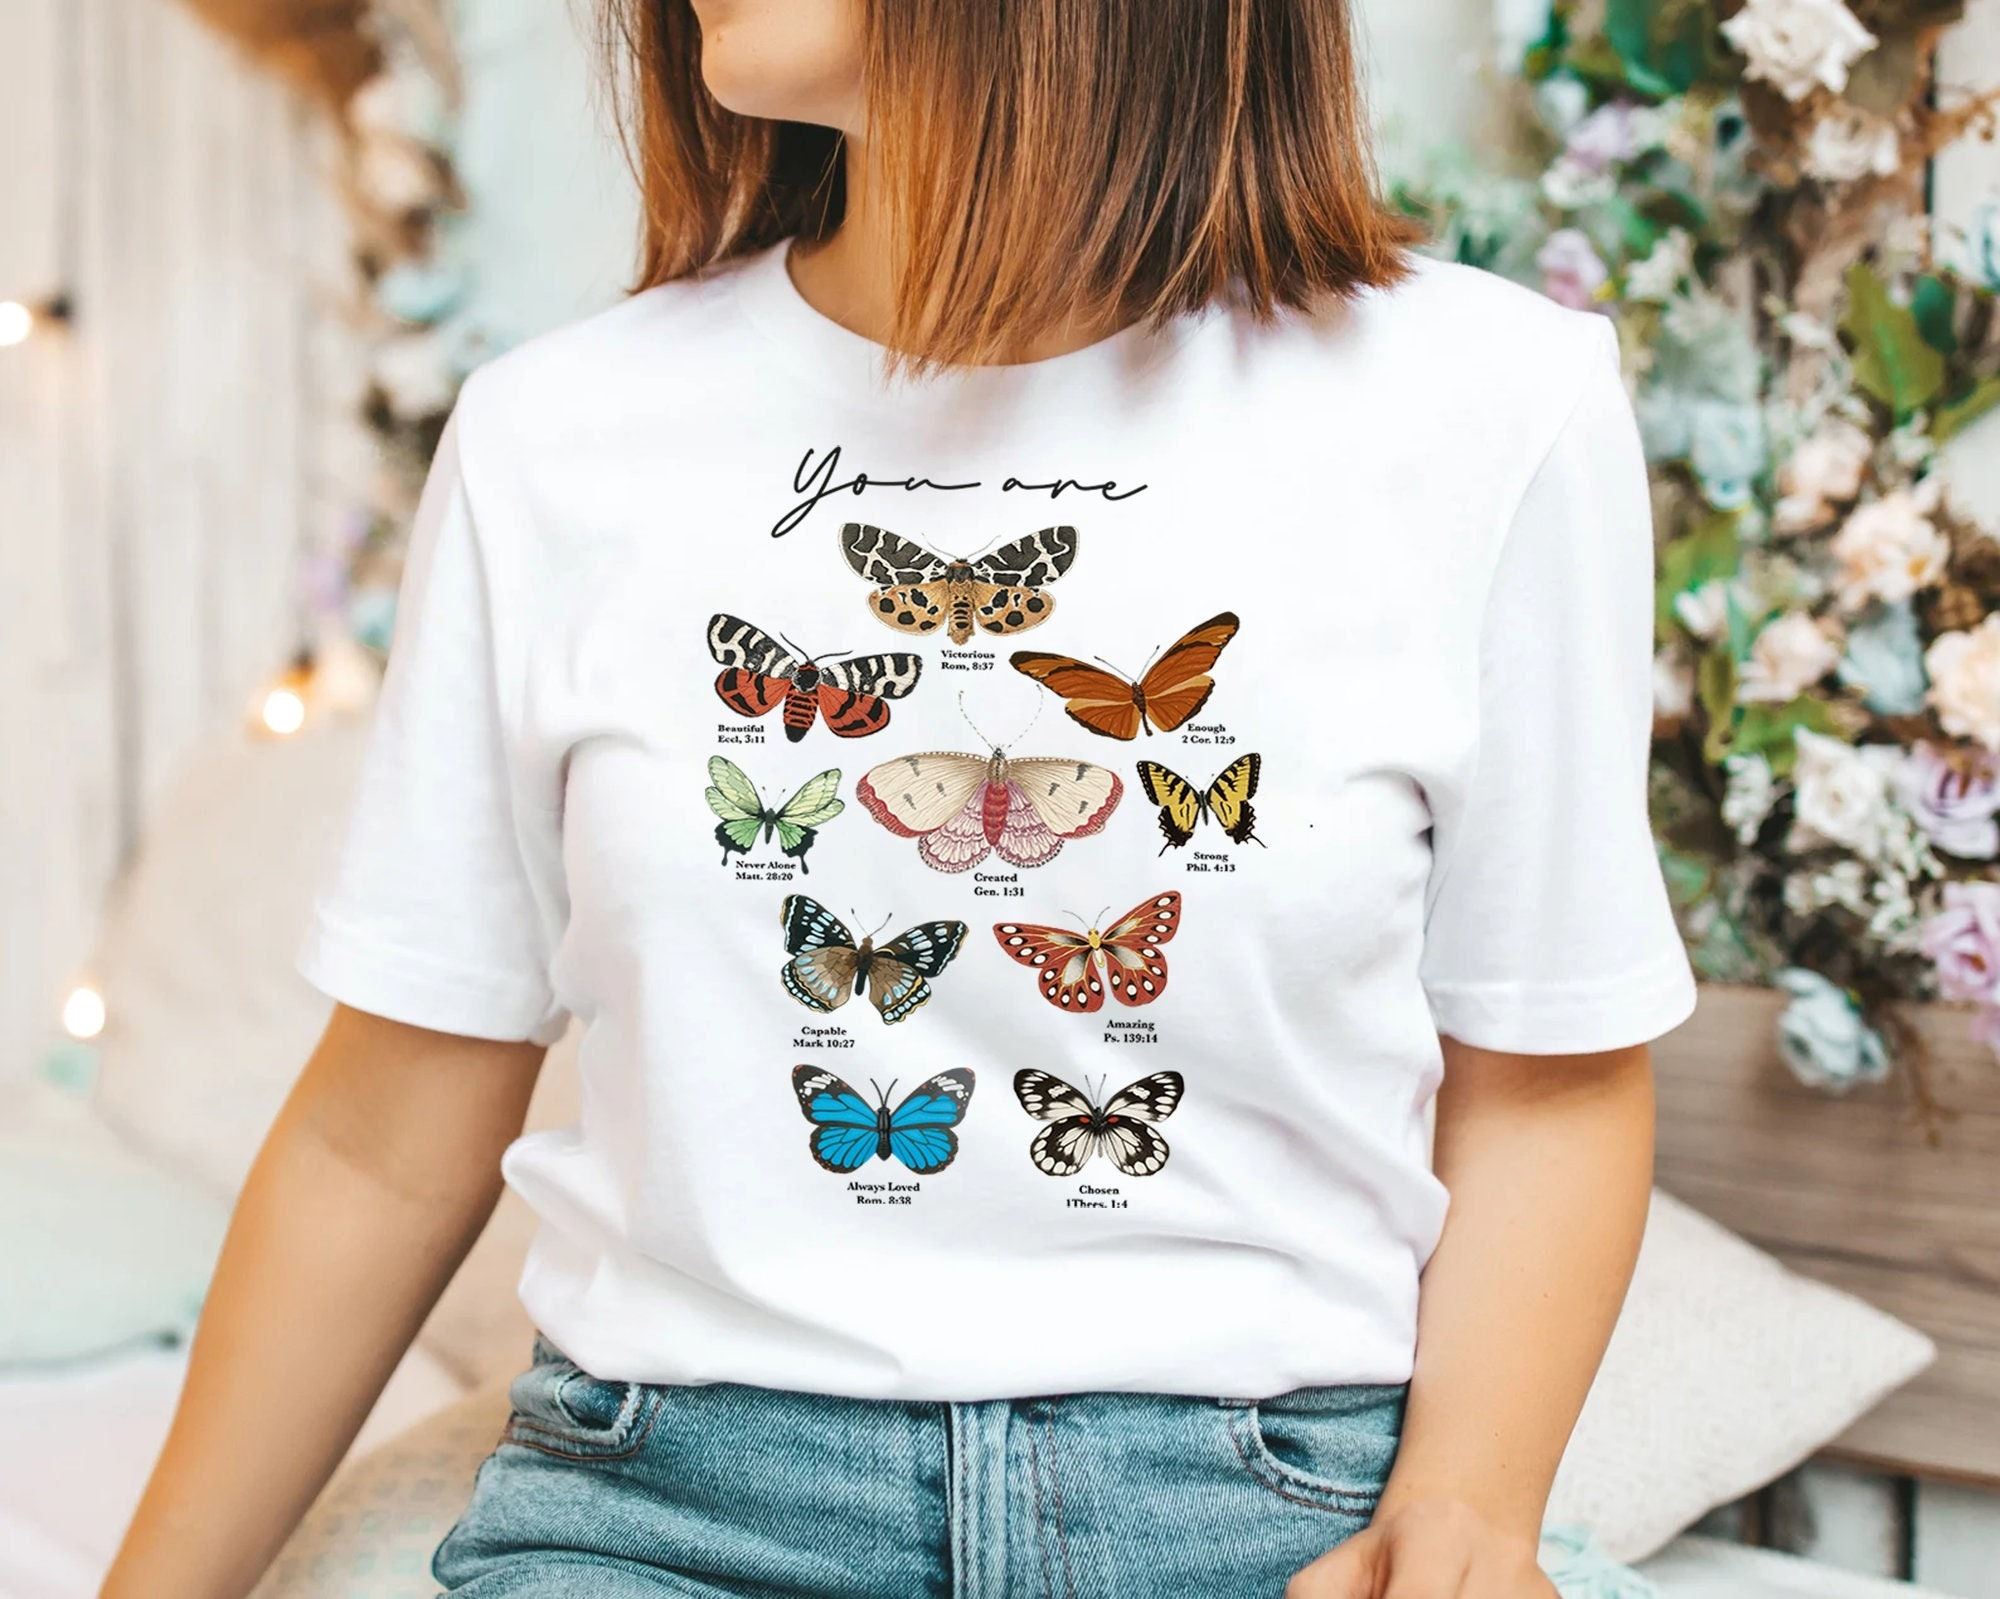 Interesting Butterfly Bible Verse T-shirt Inspirational Quotes Religious Shirt Christian Shirt Motivational Tee You Are Beautiful Positive Sayings 